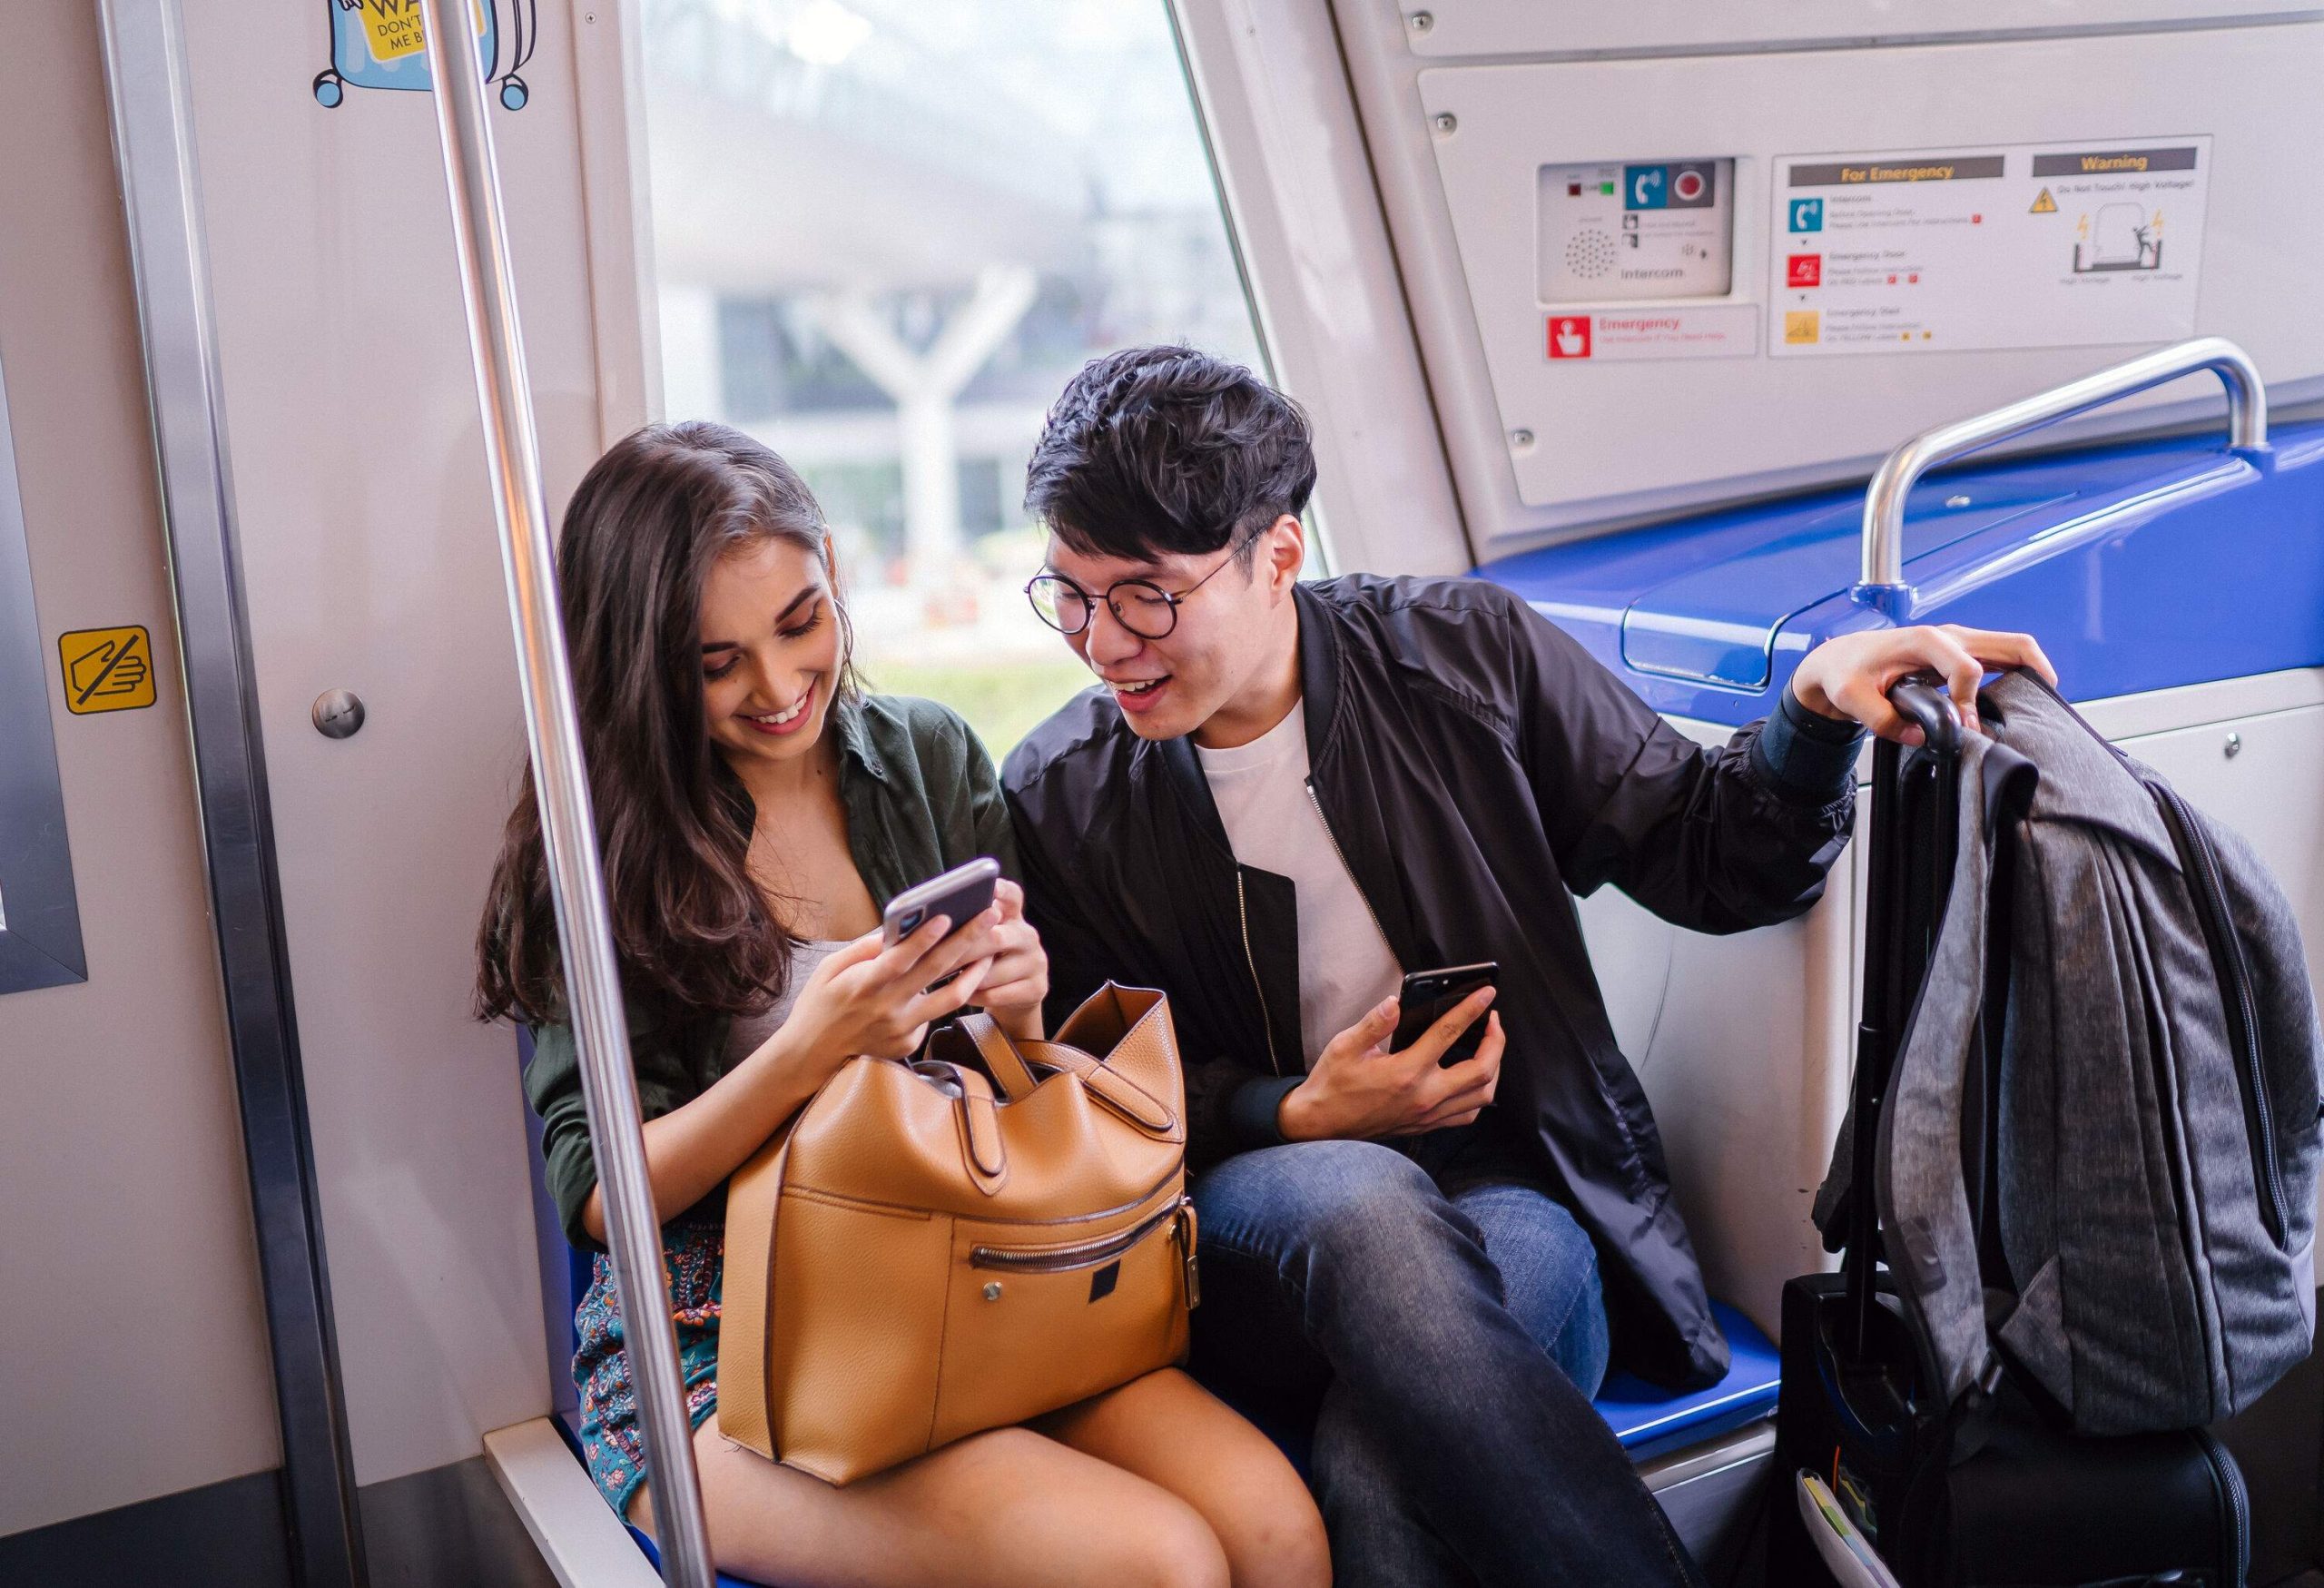 A couple smile as they sit in a train and look at a smartphone together.